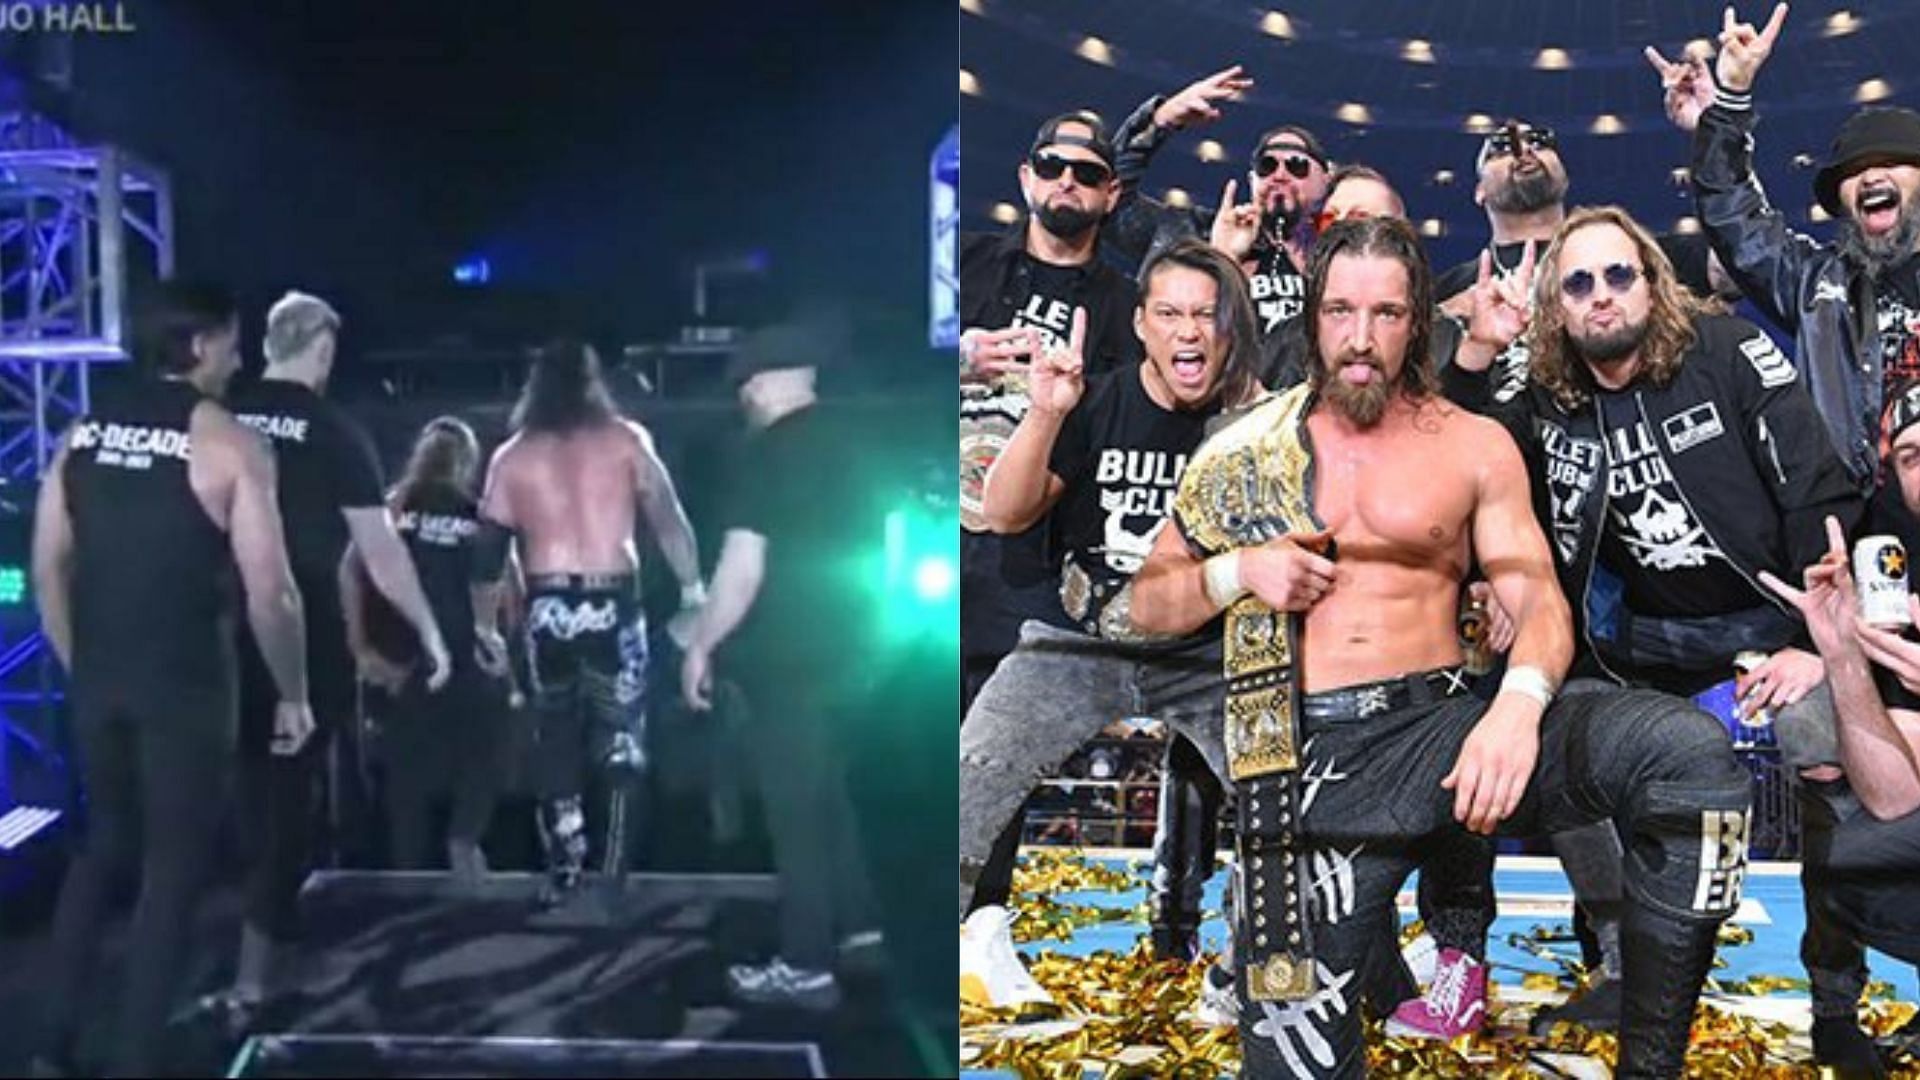 The Bullet Club has recruited a new member in the form of a former WWE star